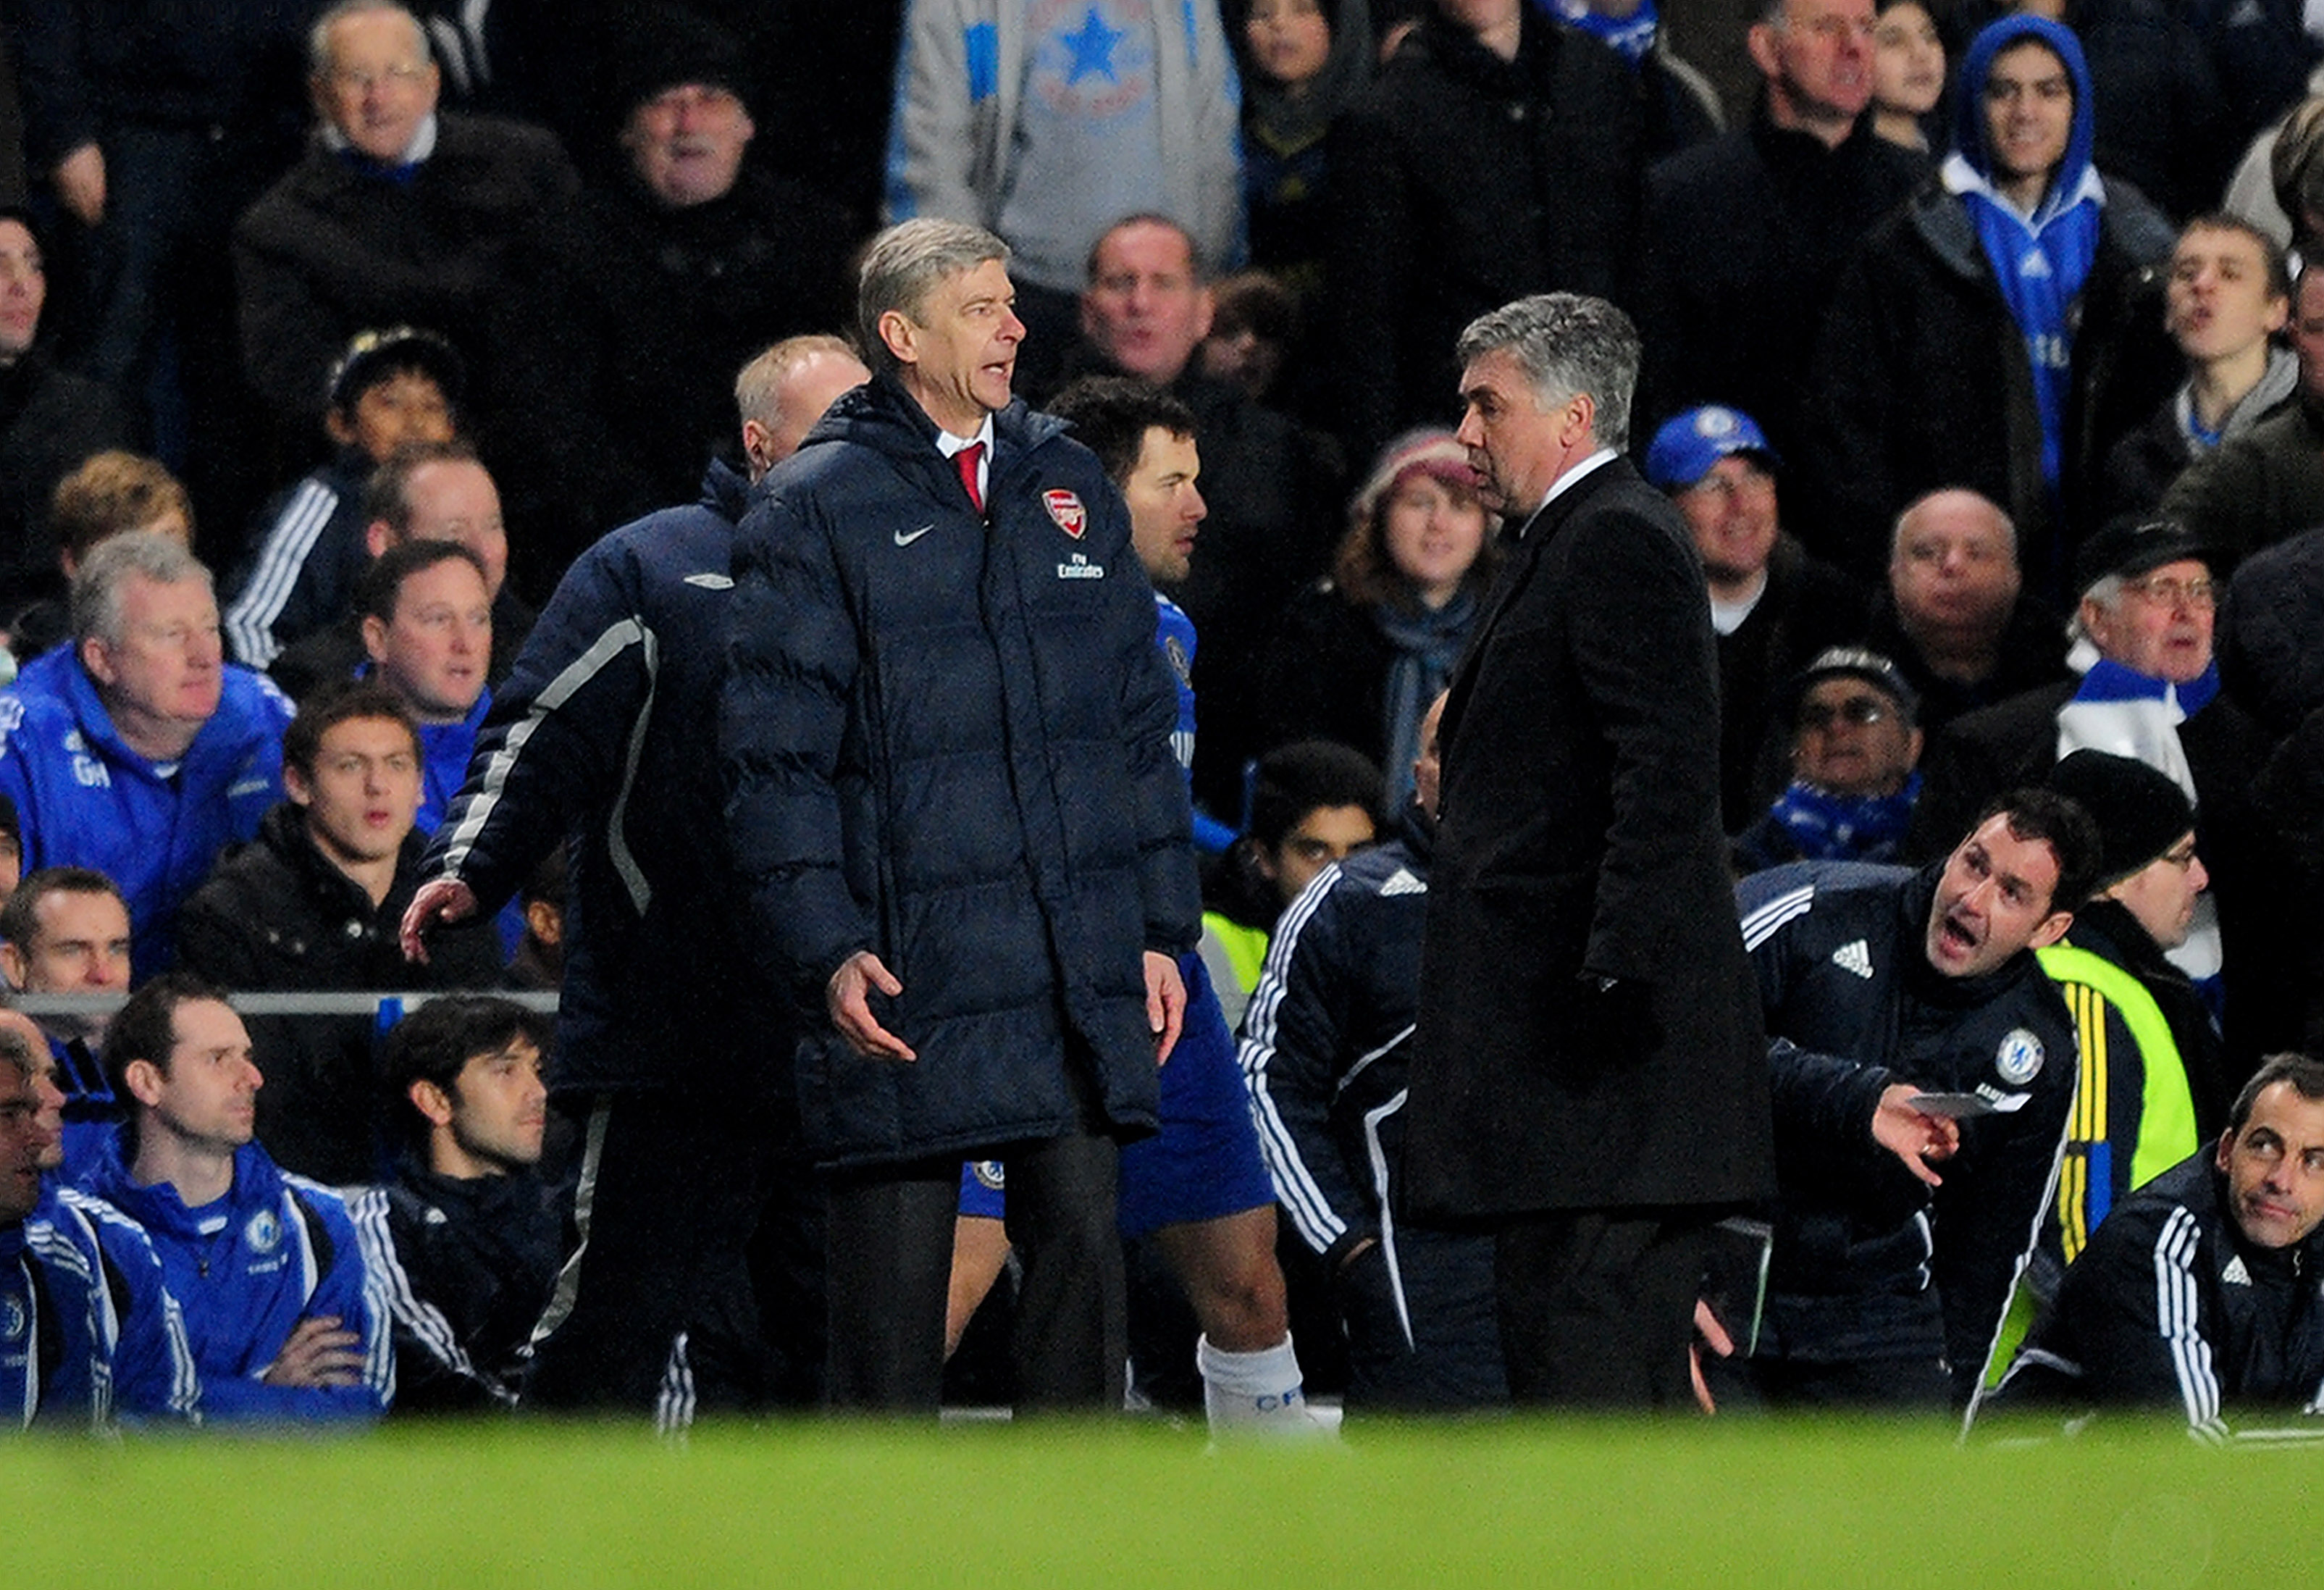 LONDON, ENGLAND - FEBRUARY 07:  Chelsea Manager Carlo Ancelotti (R) and Arsenal Manager Arsene Wenger speak during the Barclays Premier League match between Chelsea and Arsenal at Stamford Bridge on February 7, 2010 in London, England.  (Photo by Mike Hew